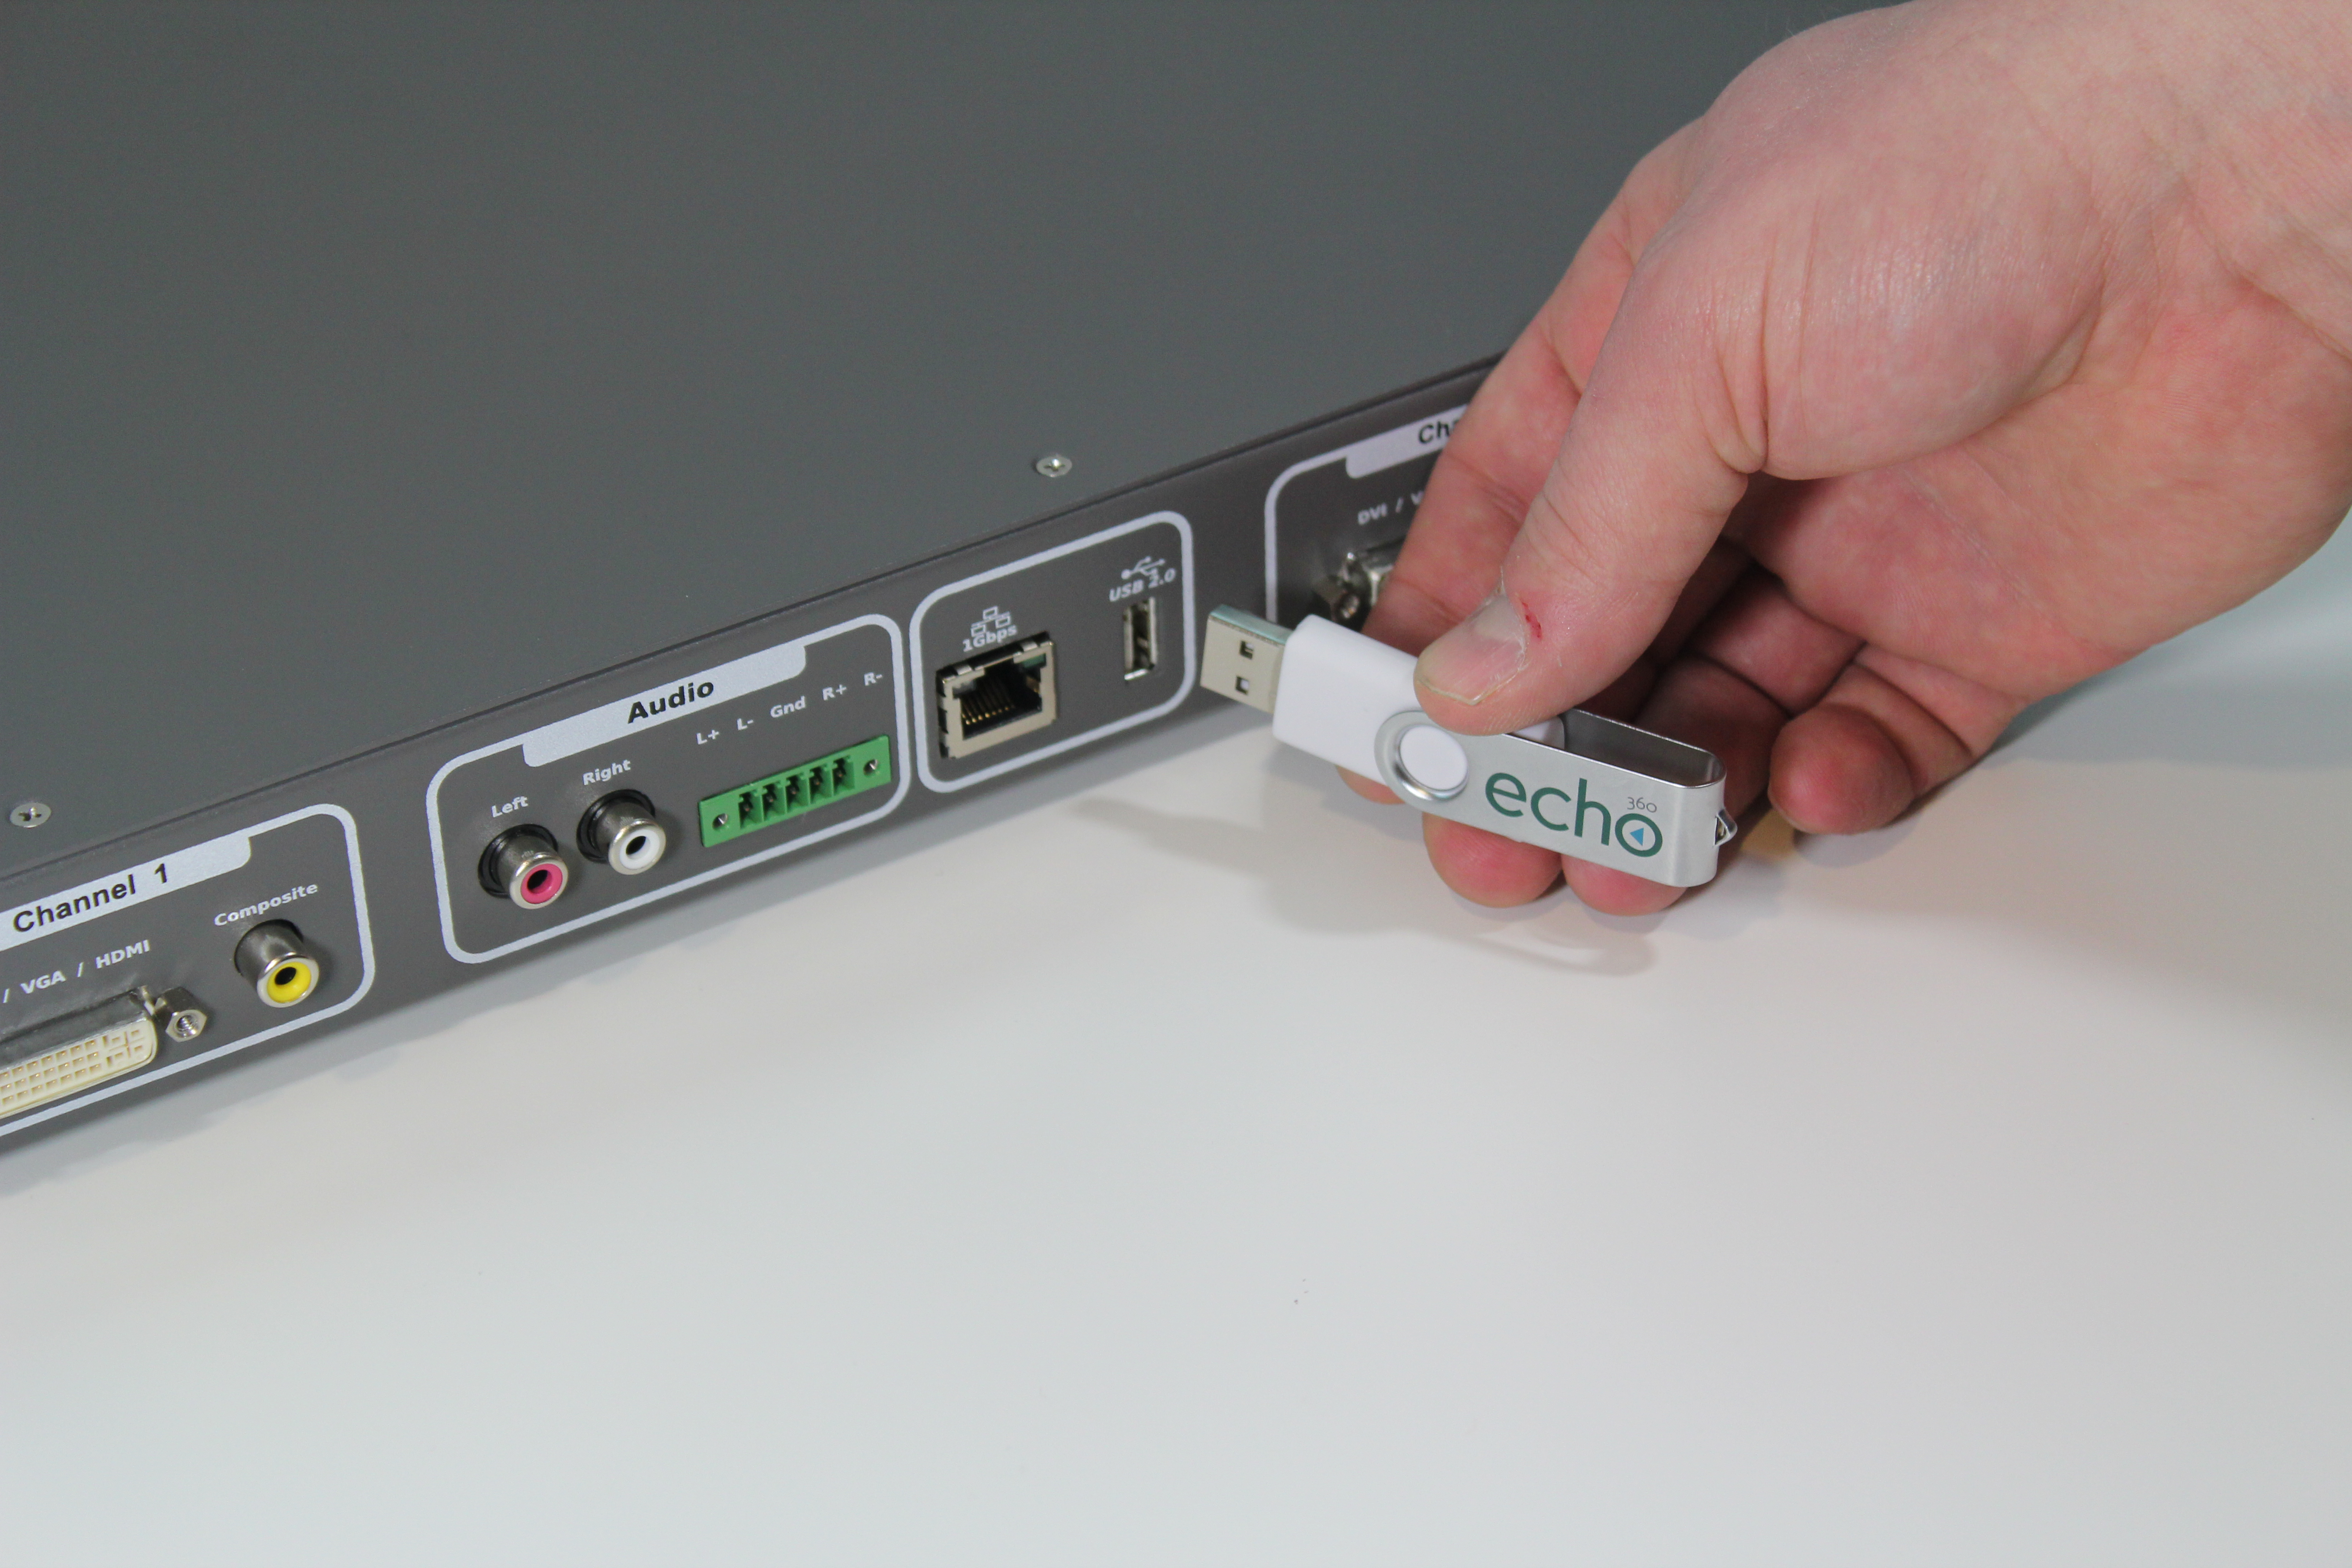 Picture of USB drive being plugged into back of SafeCapture appliance.